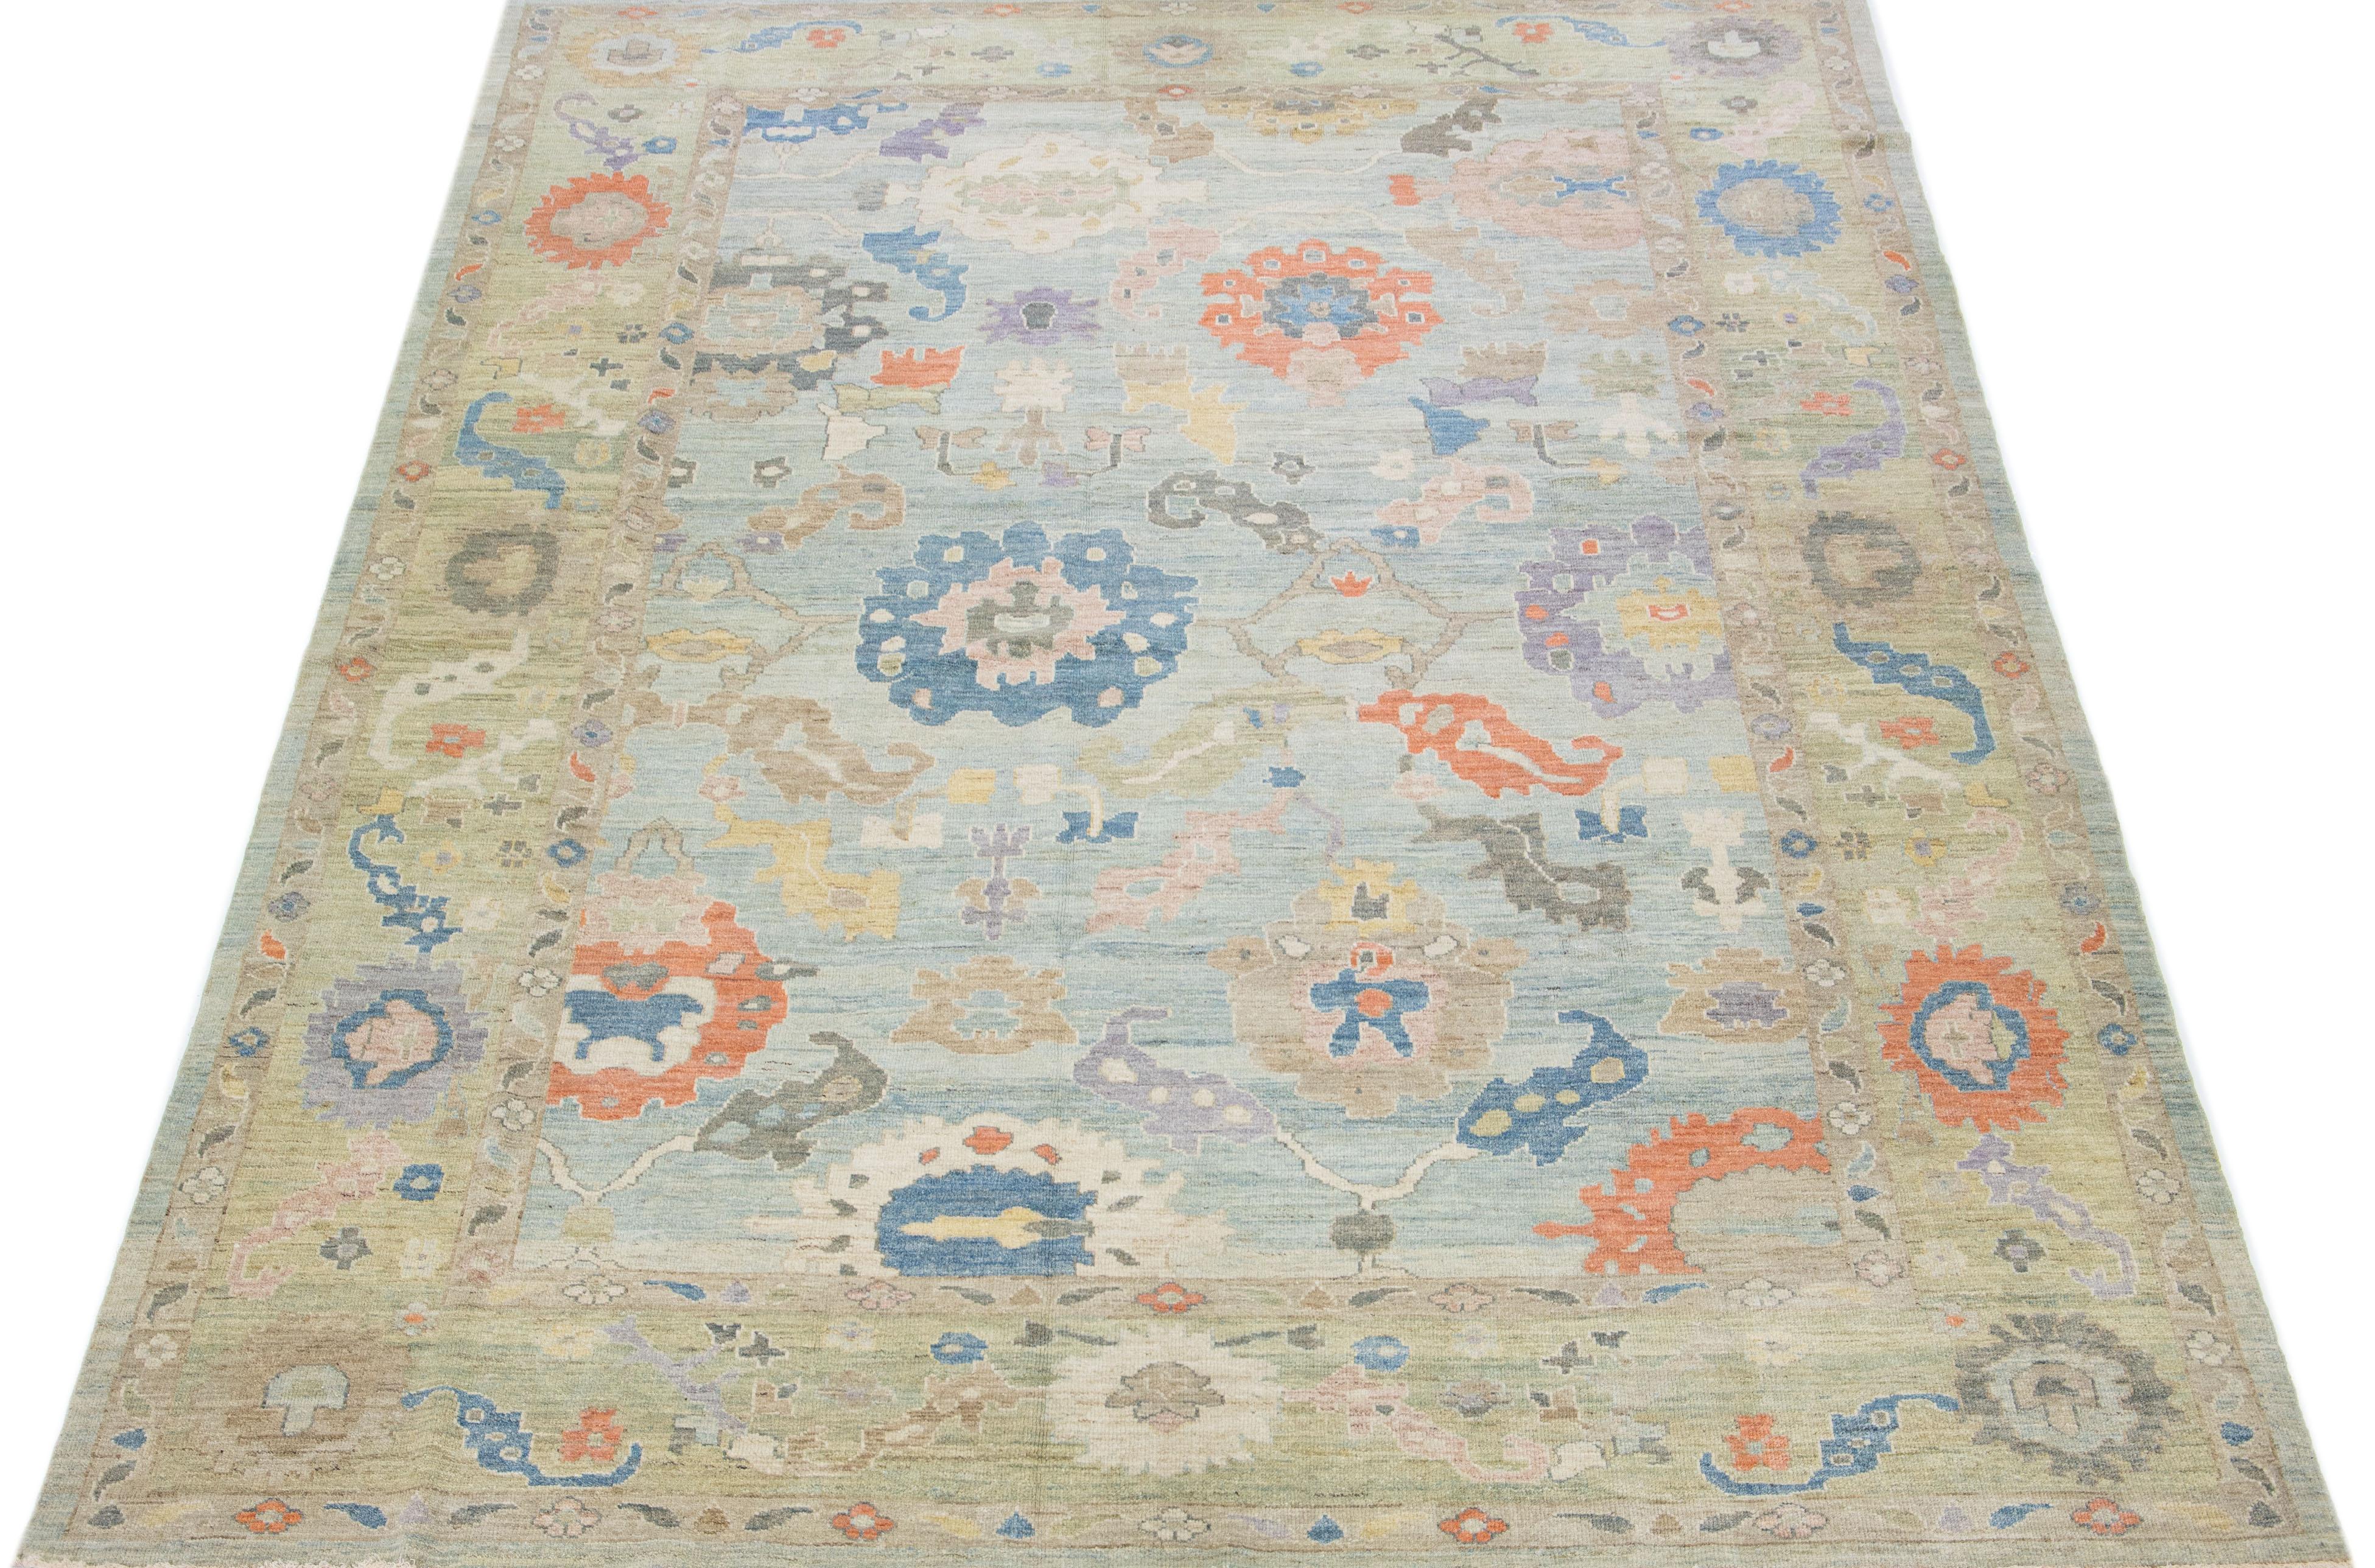 Beautiful modern sultanabad hand-knotted wool rug with a blue color field. This rug has a green-designed frame with multicolor accents in a gorgeous all-over floral design.

This rug measures: 10' x 14'6